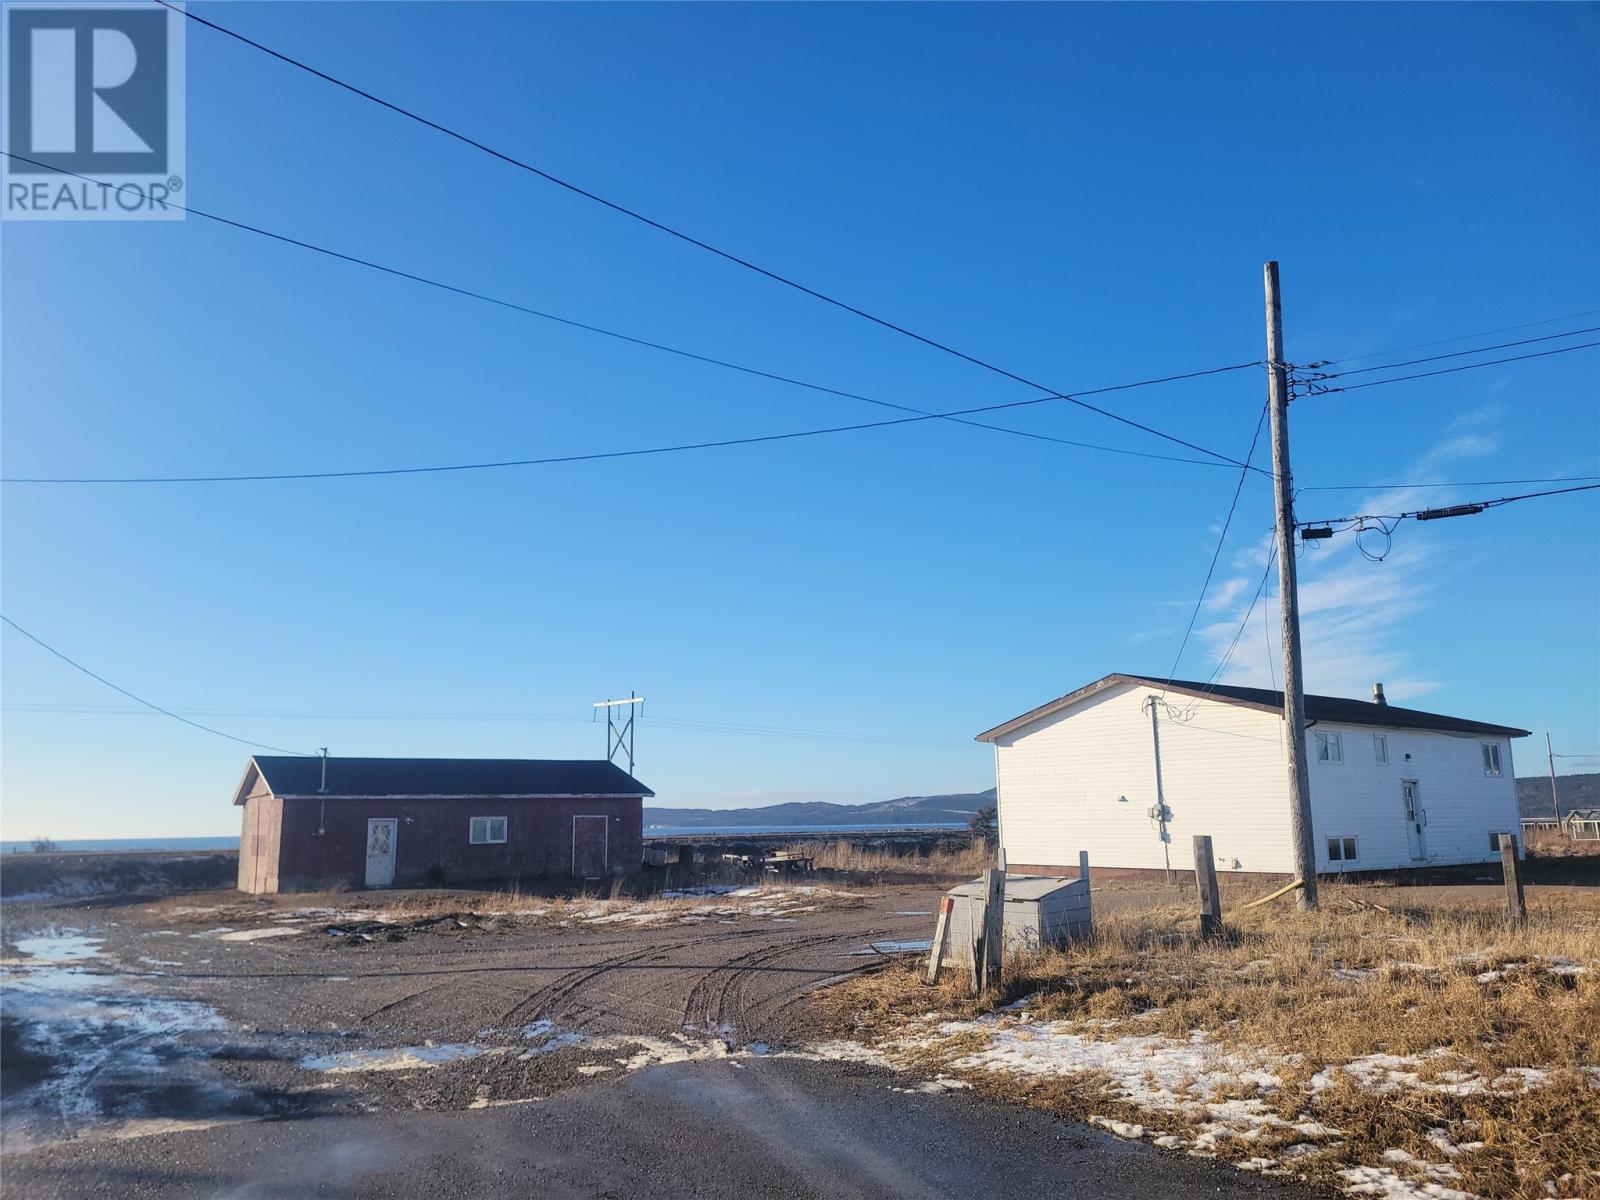 28 Pleasant Street located in Stephenville Crossing, Newfoundland and Labrador